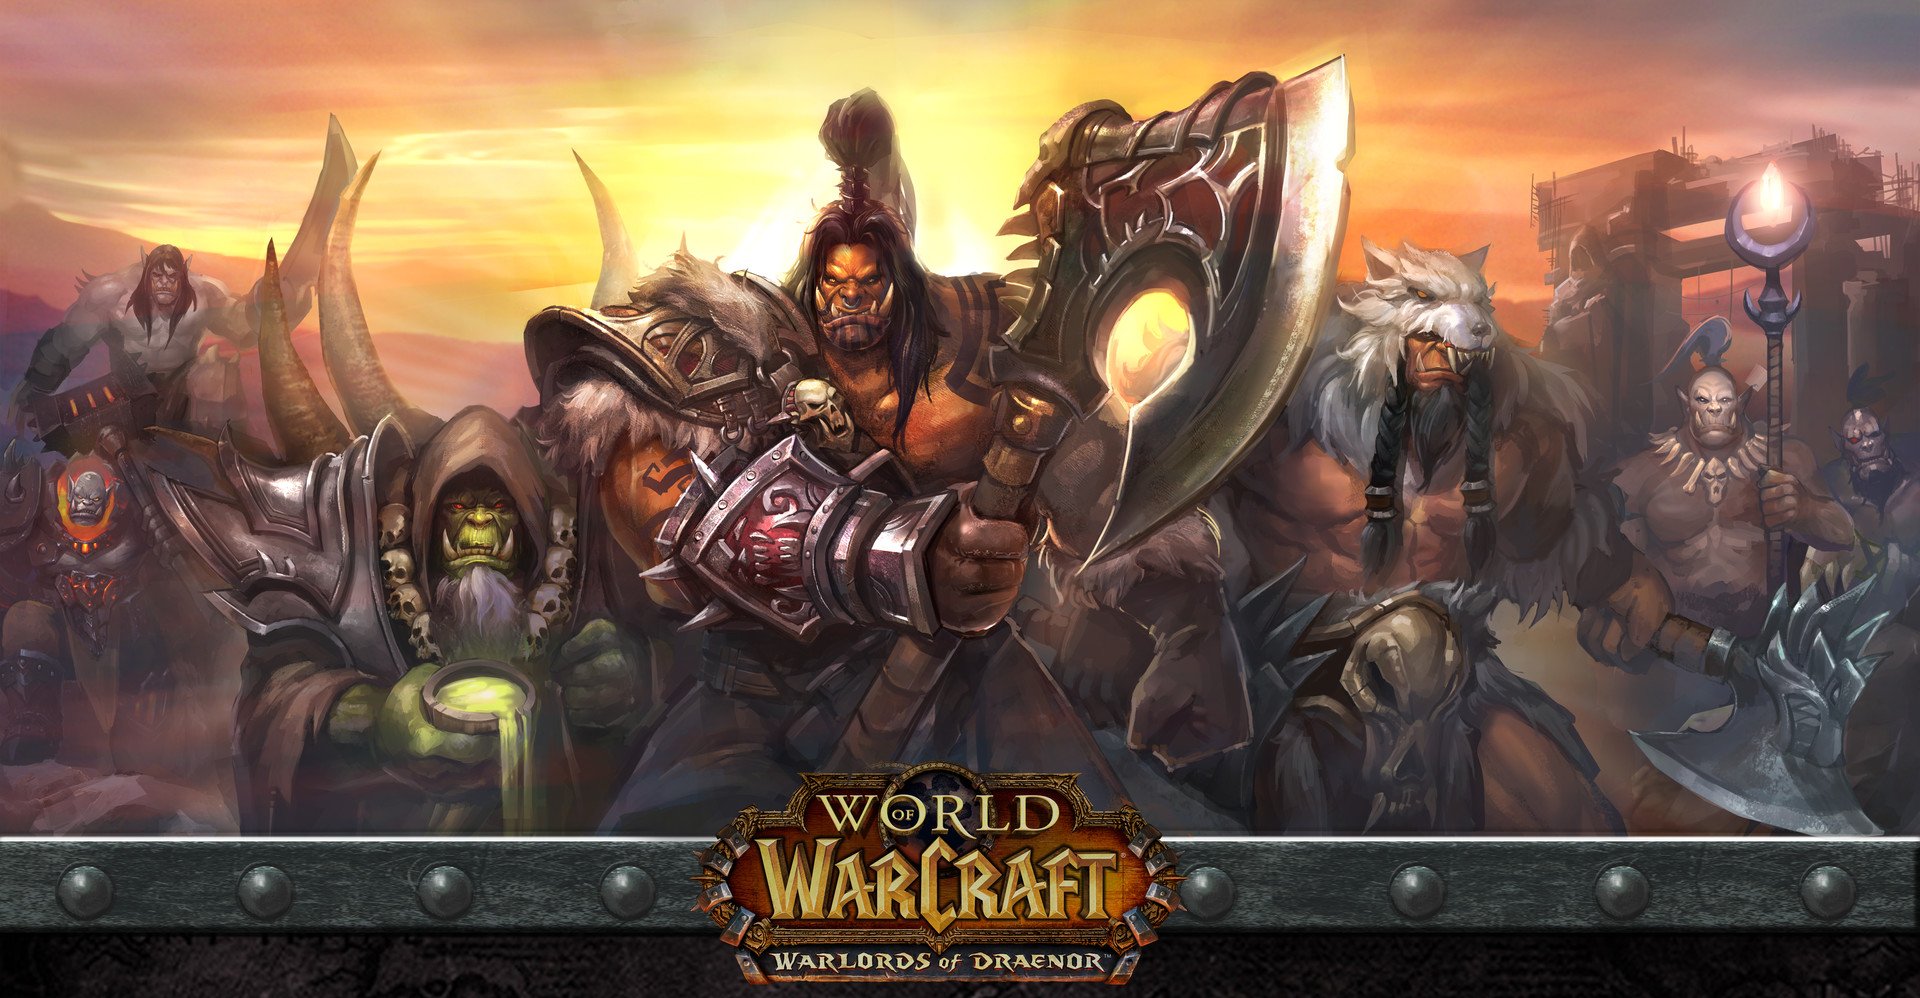 World of Warcraft:  Warlords of Draenor - Трейлер ( Русский дубляж)